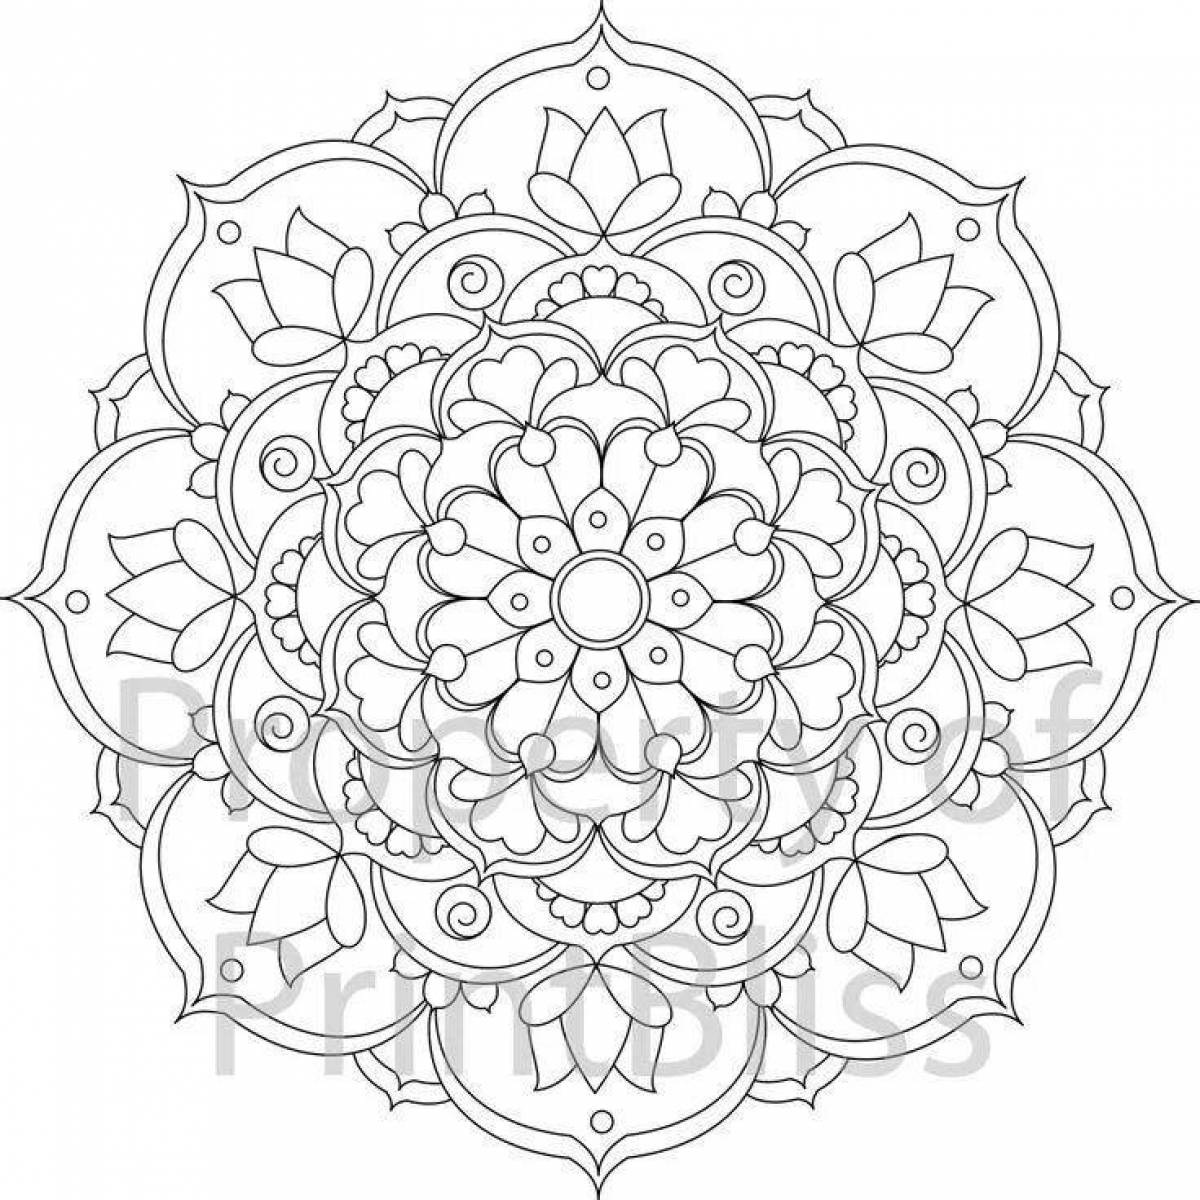 Major coloring flower of life